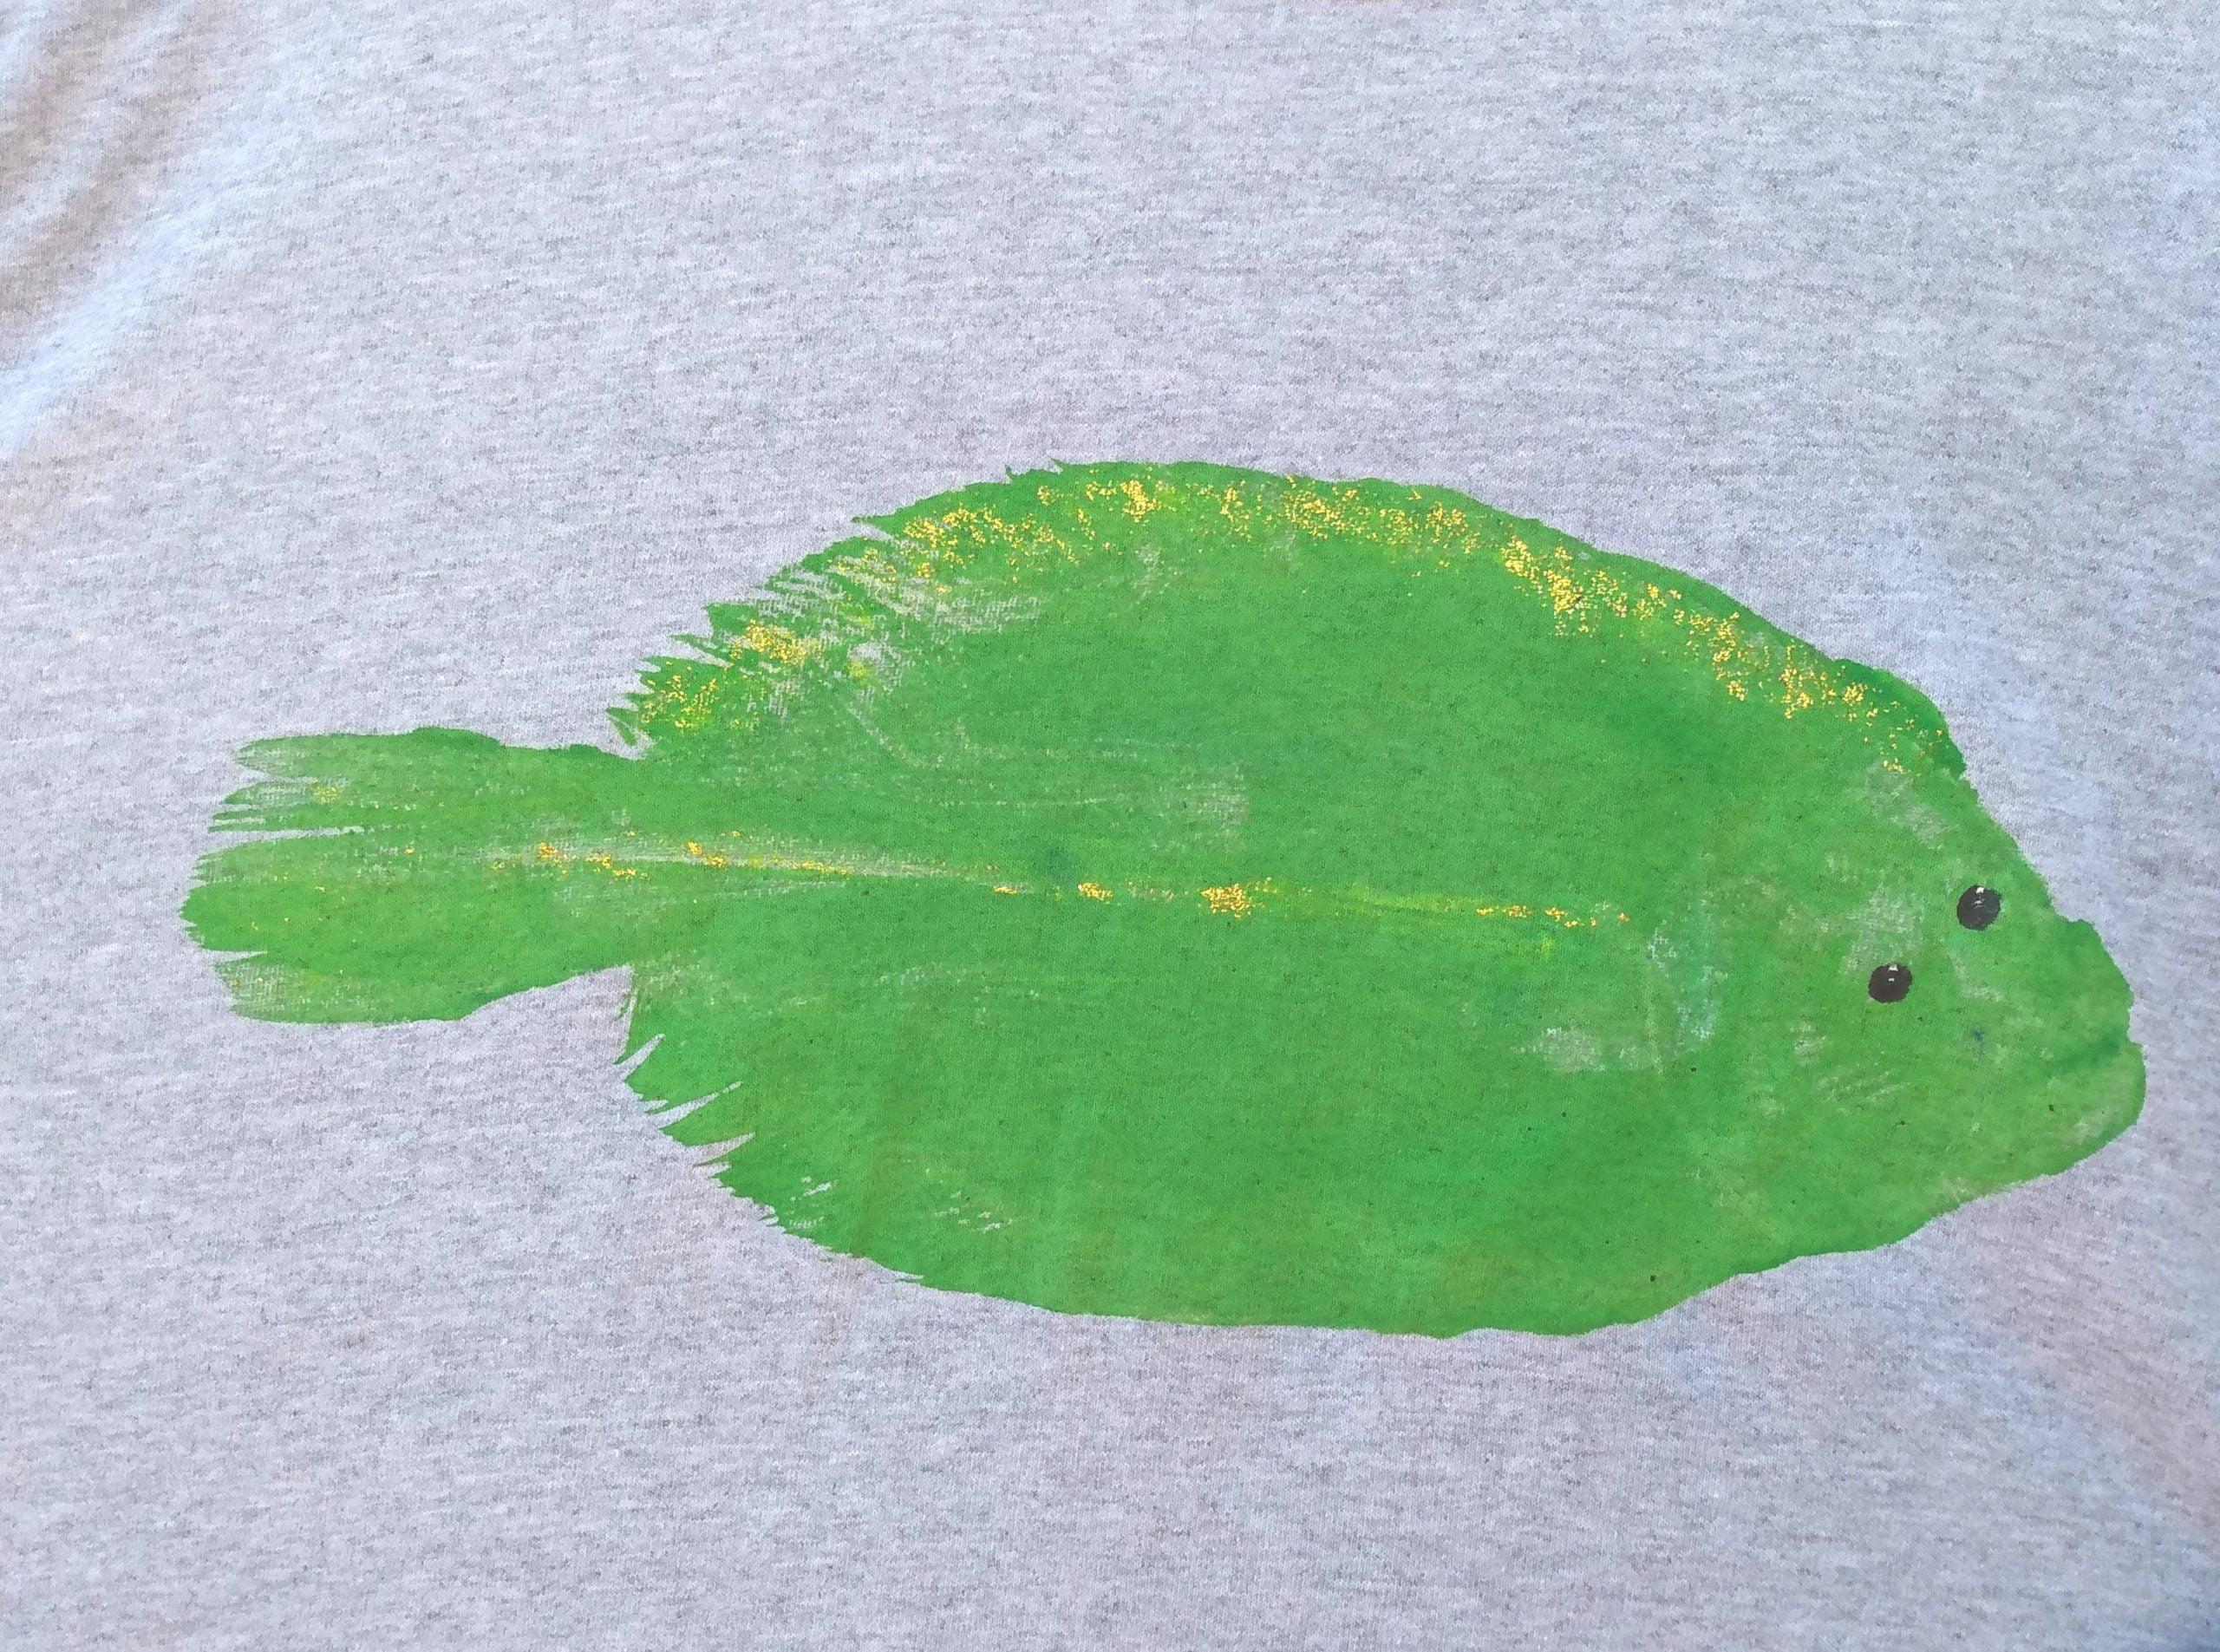 Bright green painted fish imprint on a gray t-shirt